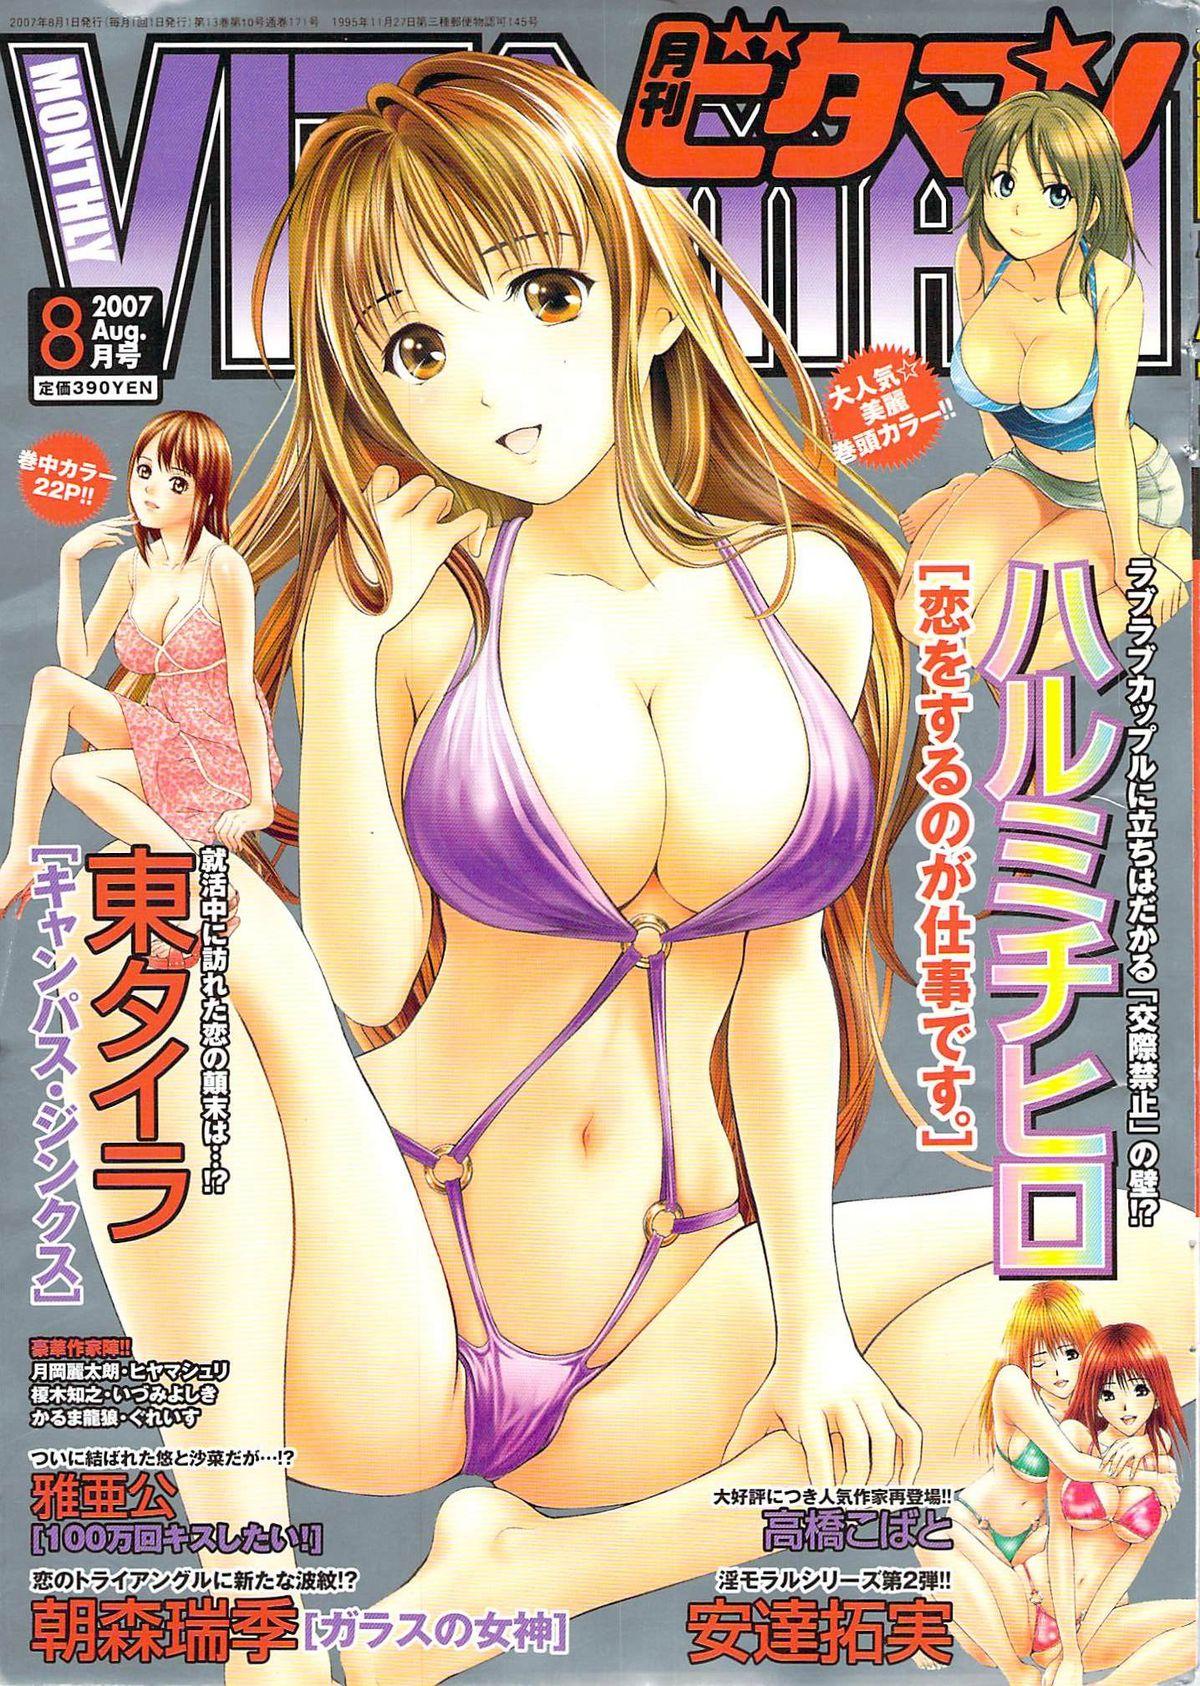 Stepfamily Monthly Vitaman 2007-08 - Gintama Jerking - Page 1